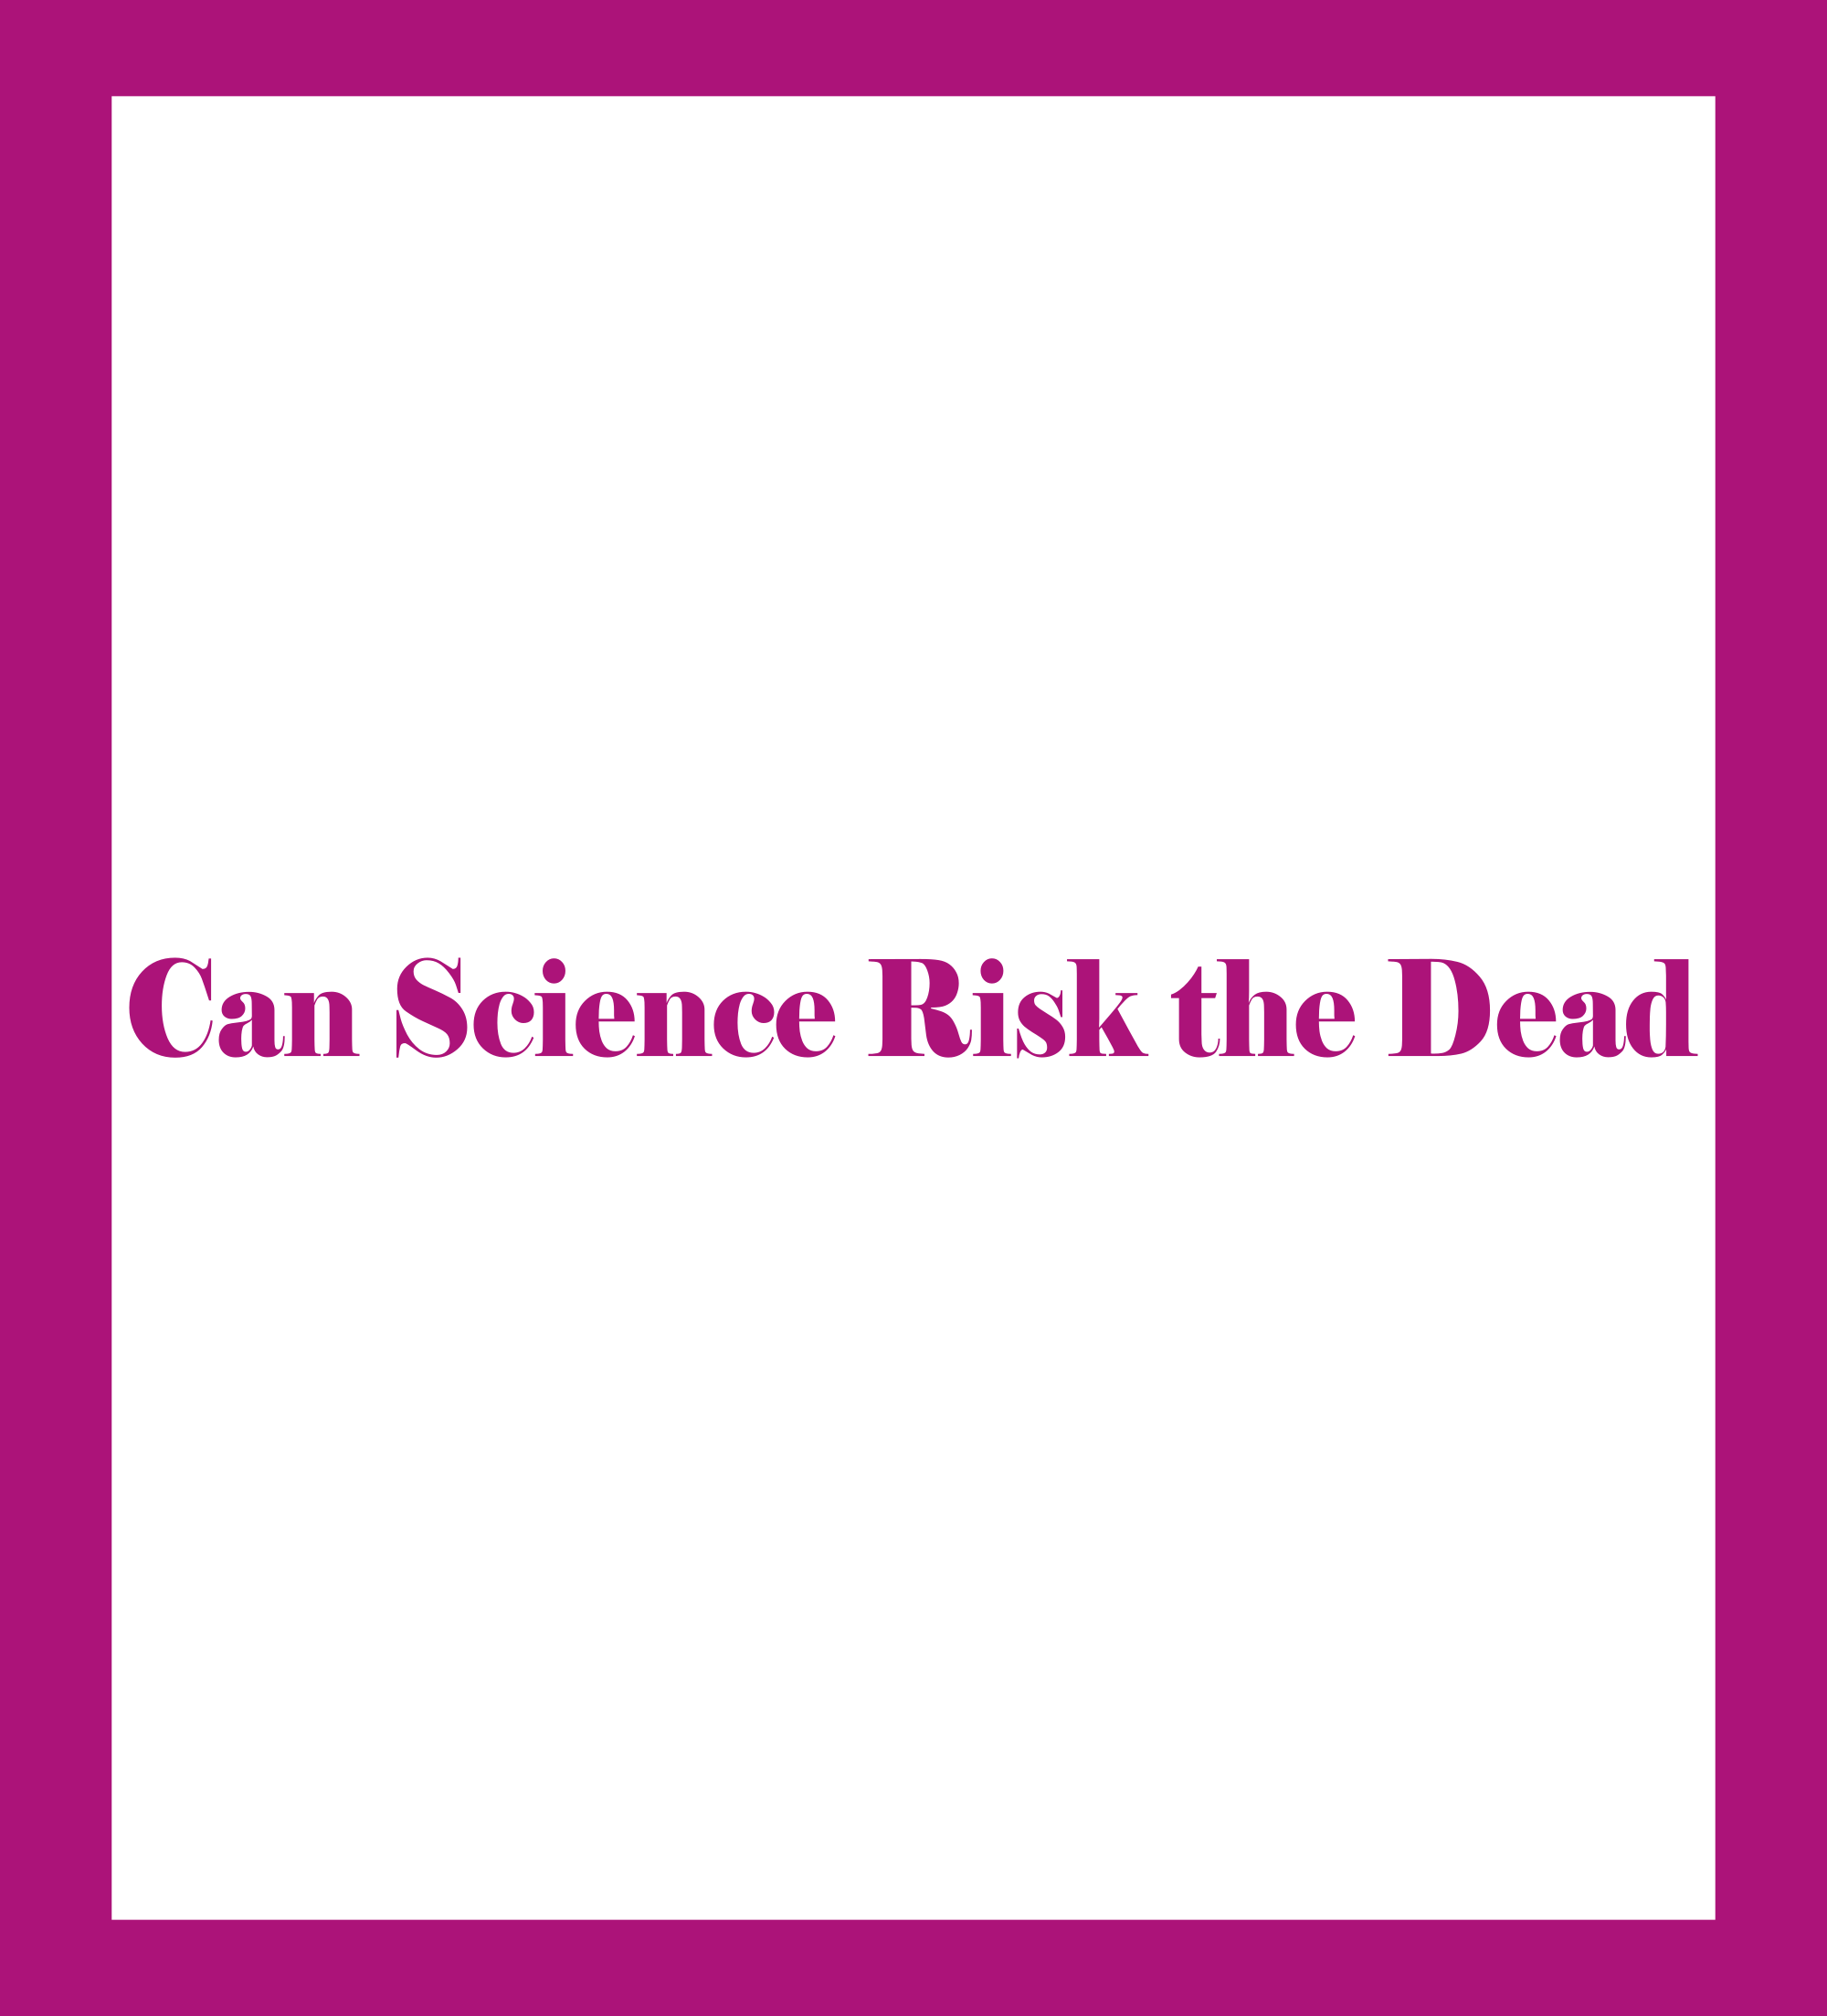 Can Science Risk the Dead